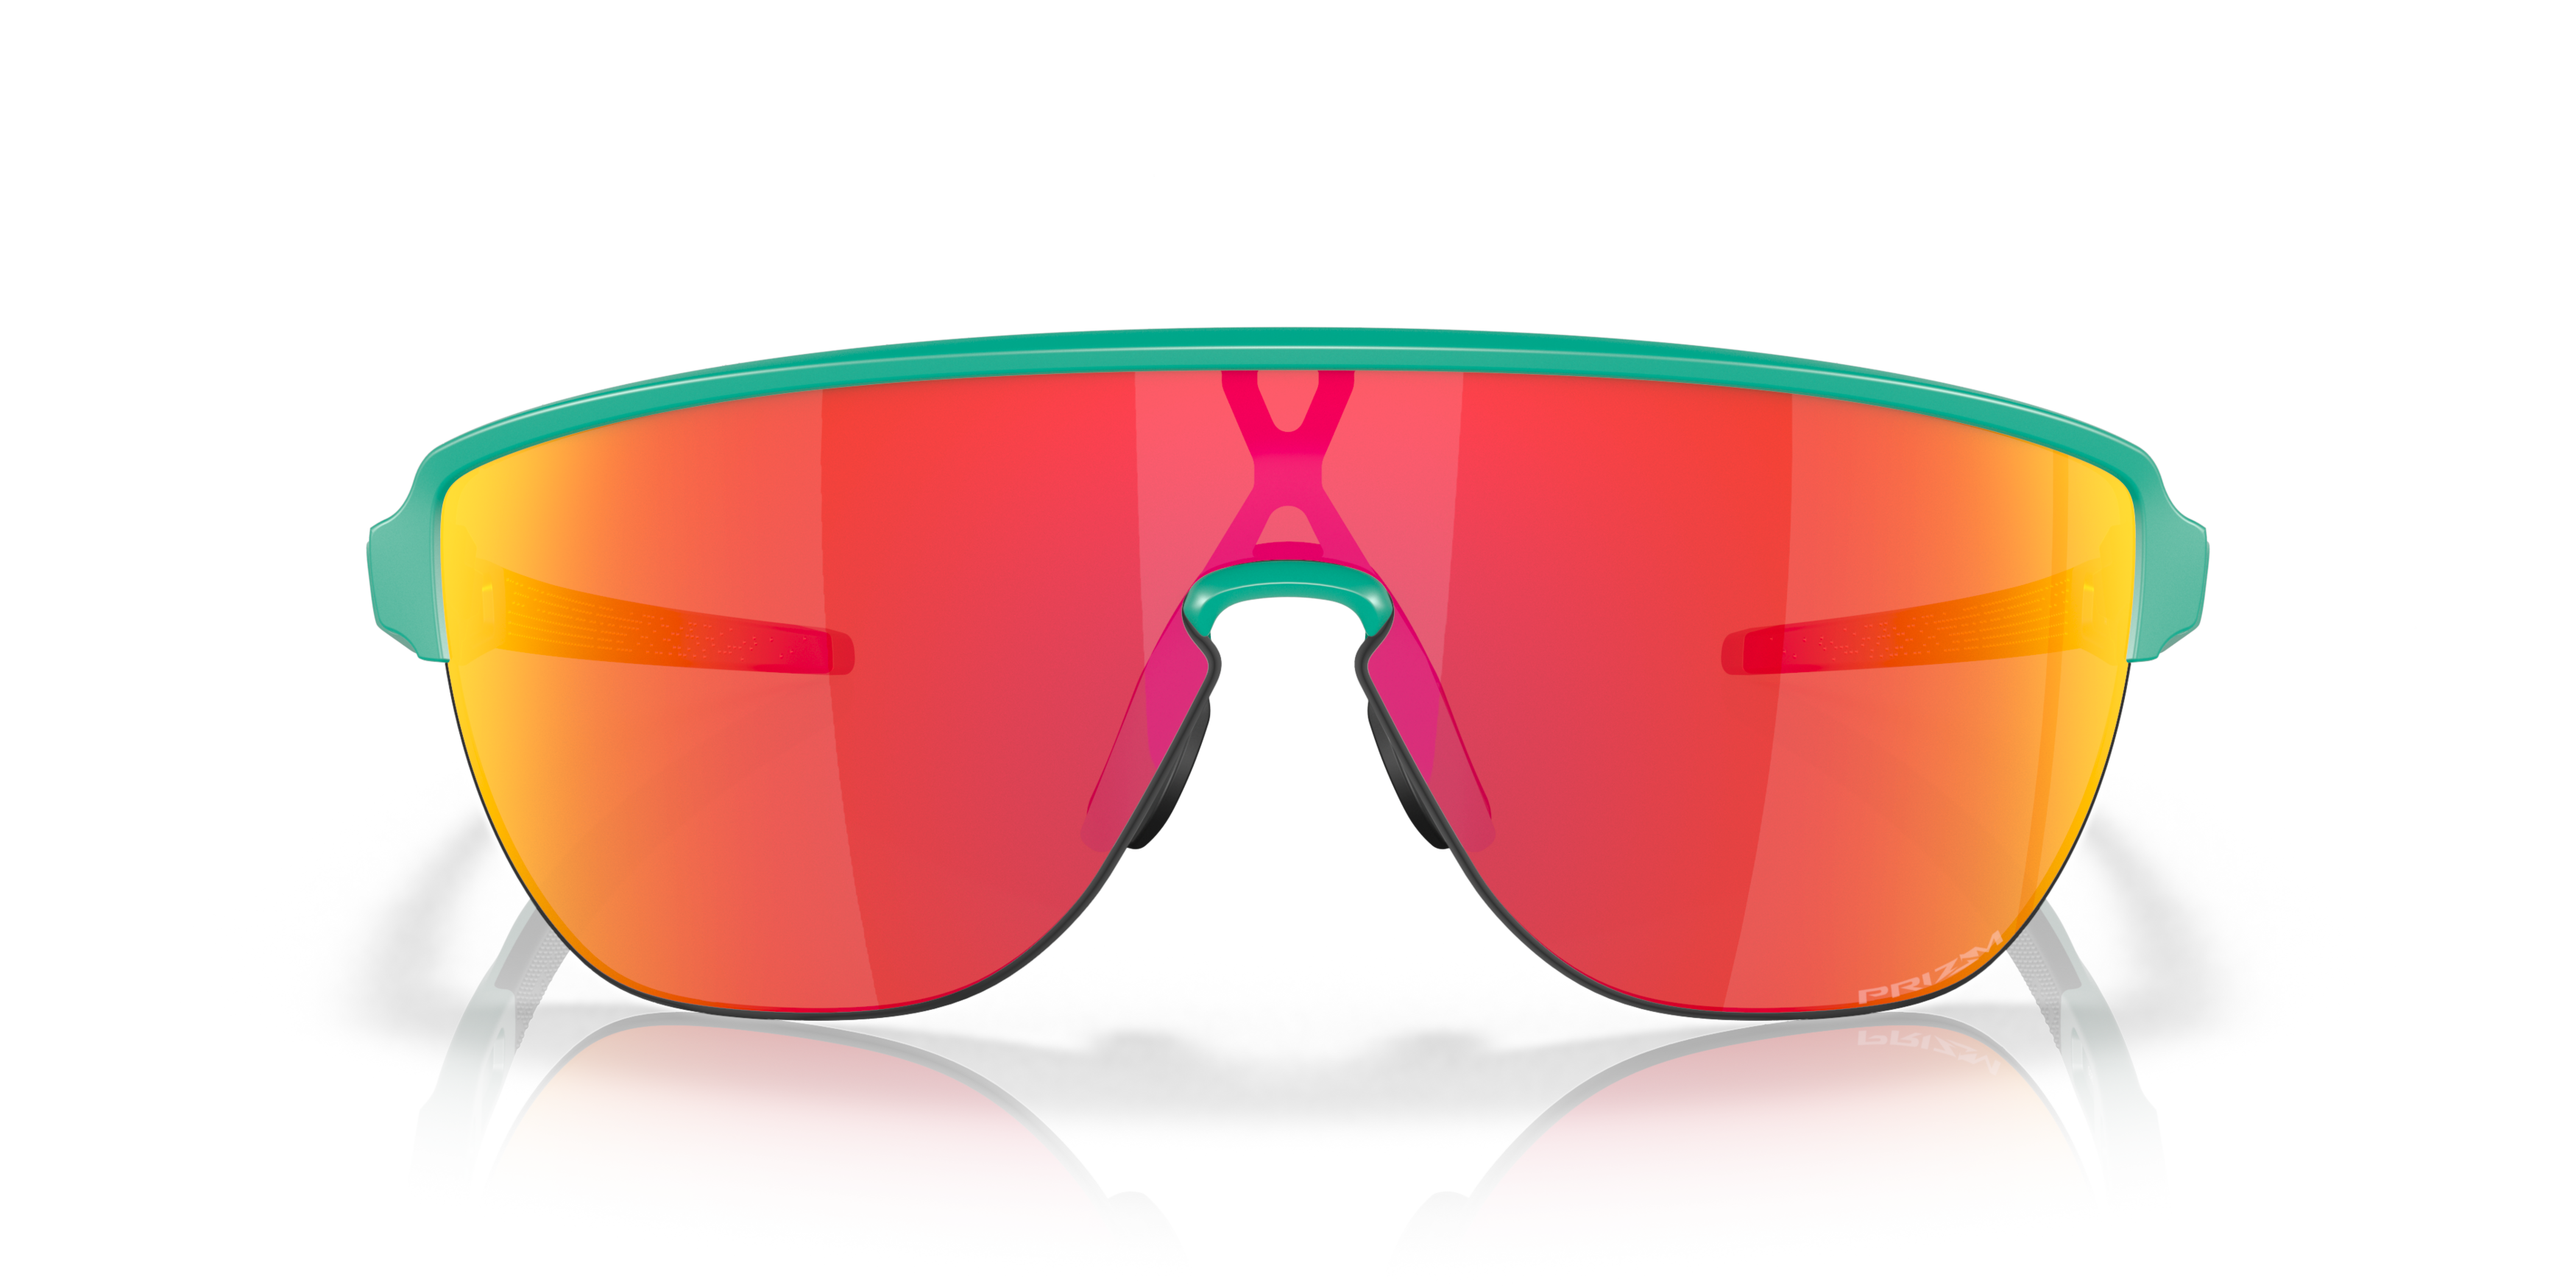 [products.image.front] Oakley CORRIDOR OO9248 924804